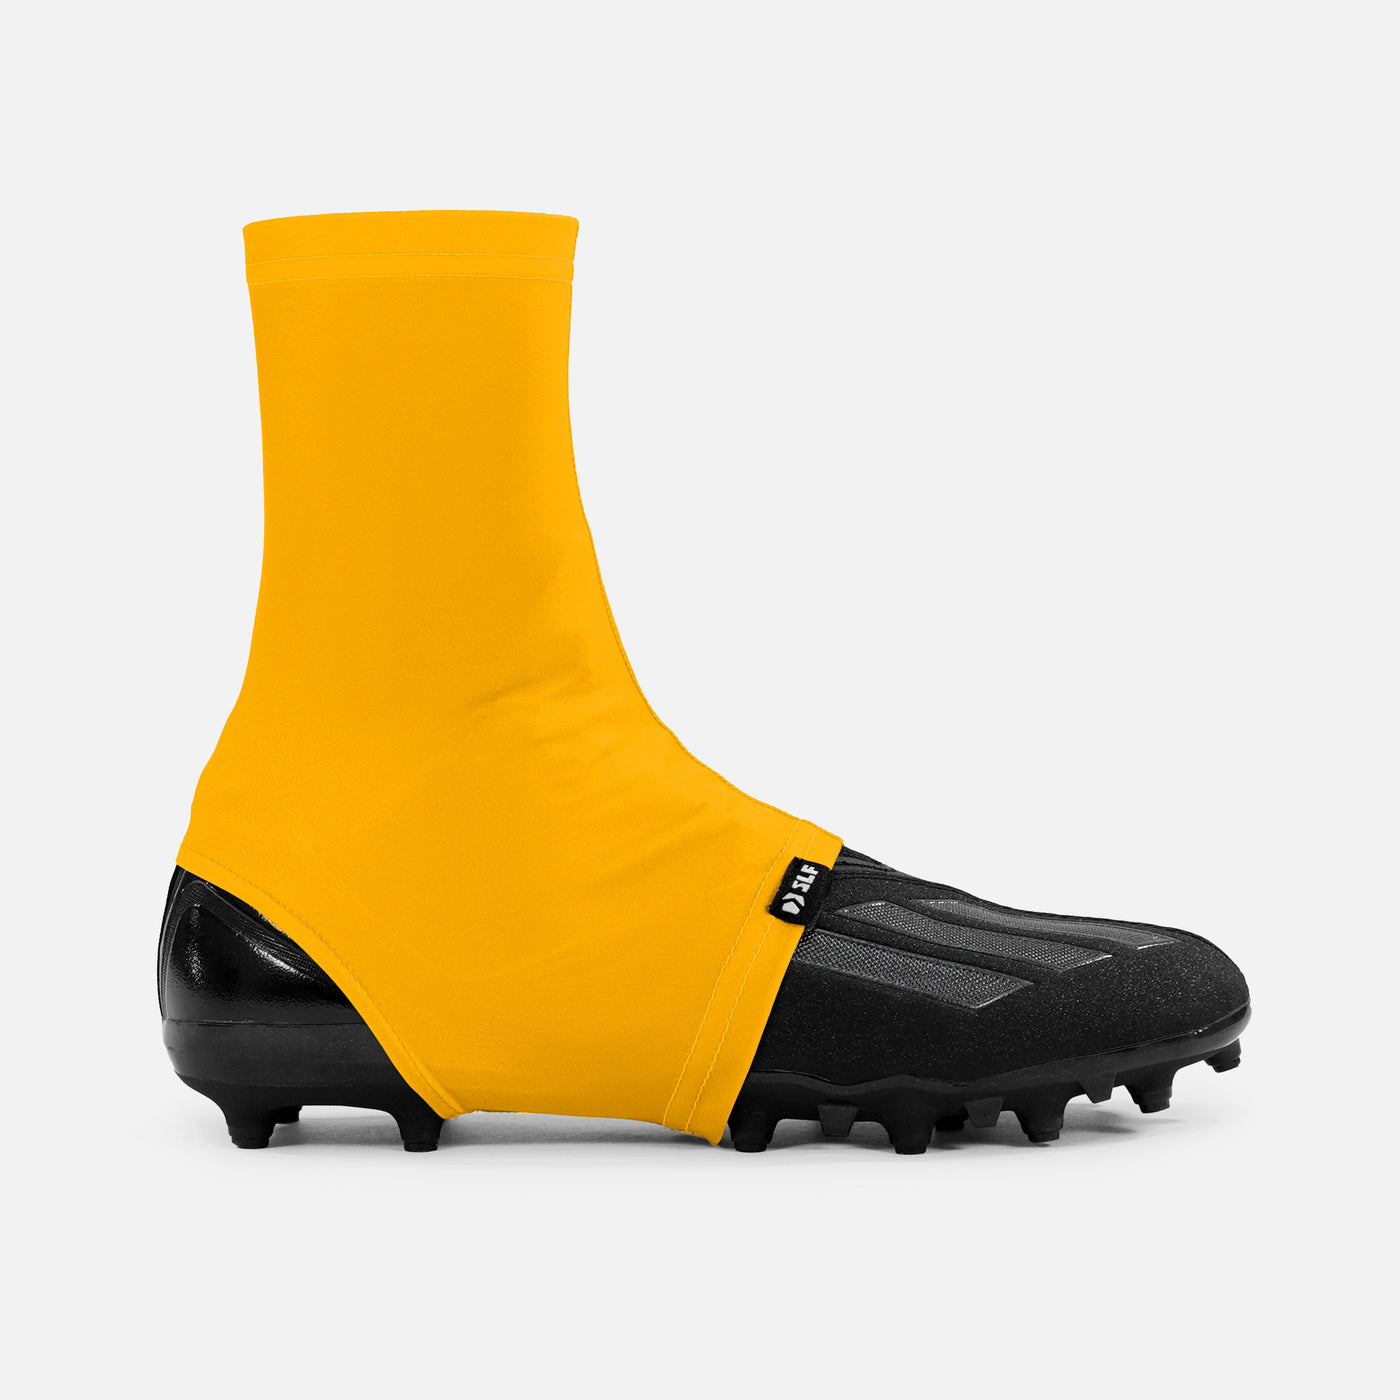 Hue Yellow Gold Spats / Cleat Covers